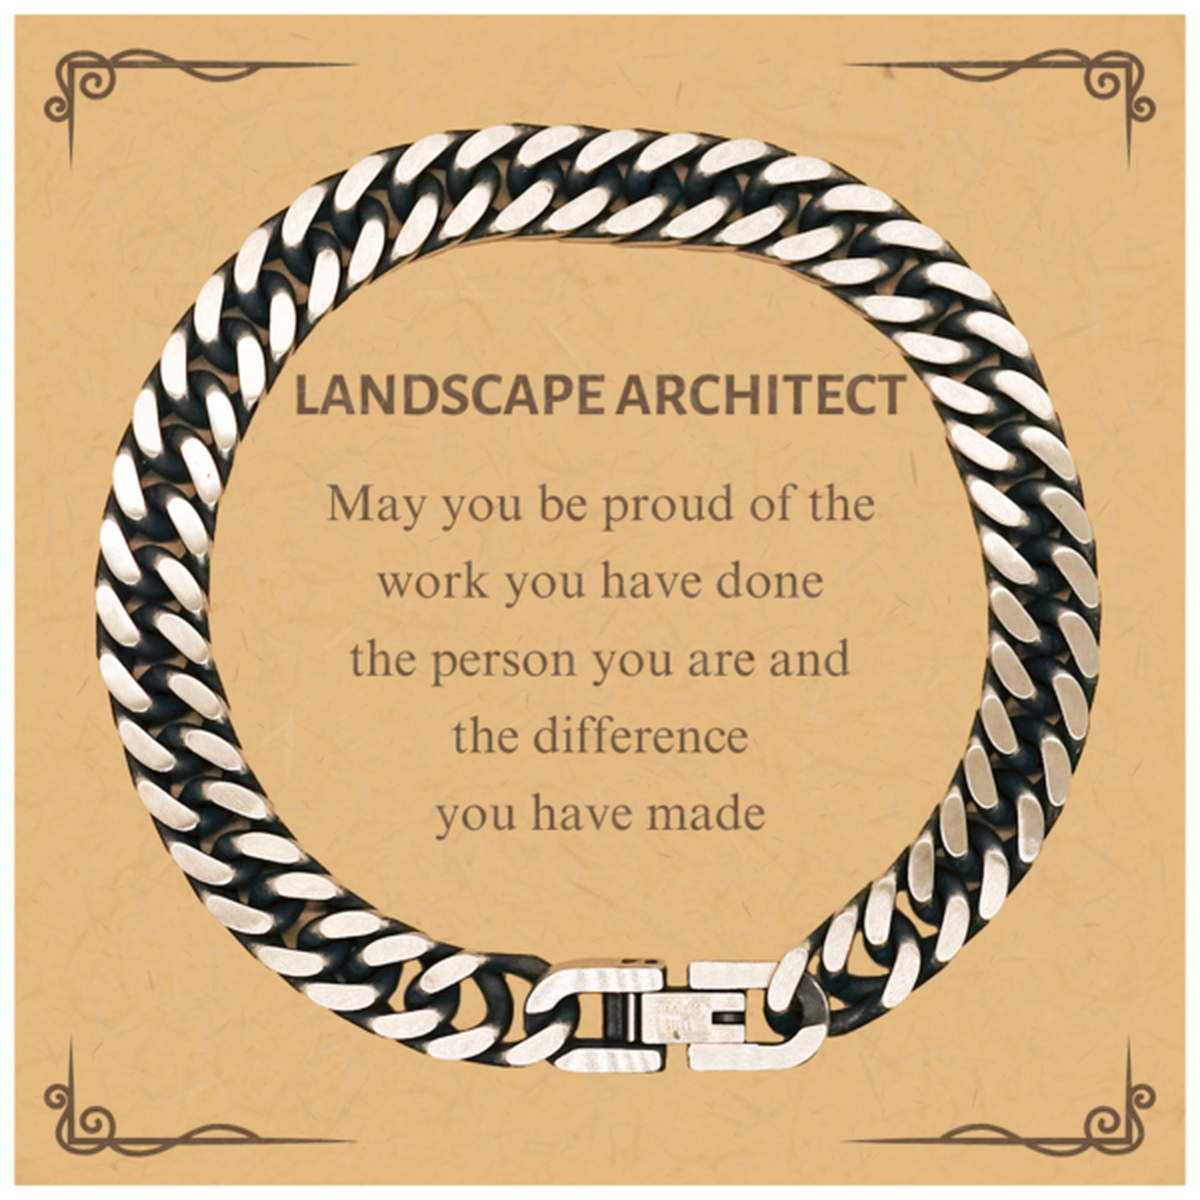 Landscape Architect May you be proud of the work you have done, Retirement Landscape Architect Cuban Link Chain Bracelet for Colleague Appreciation Gifts Amazing for Landscape Architect